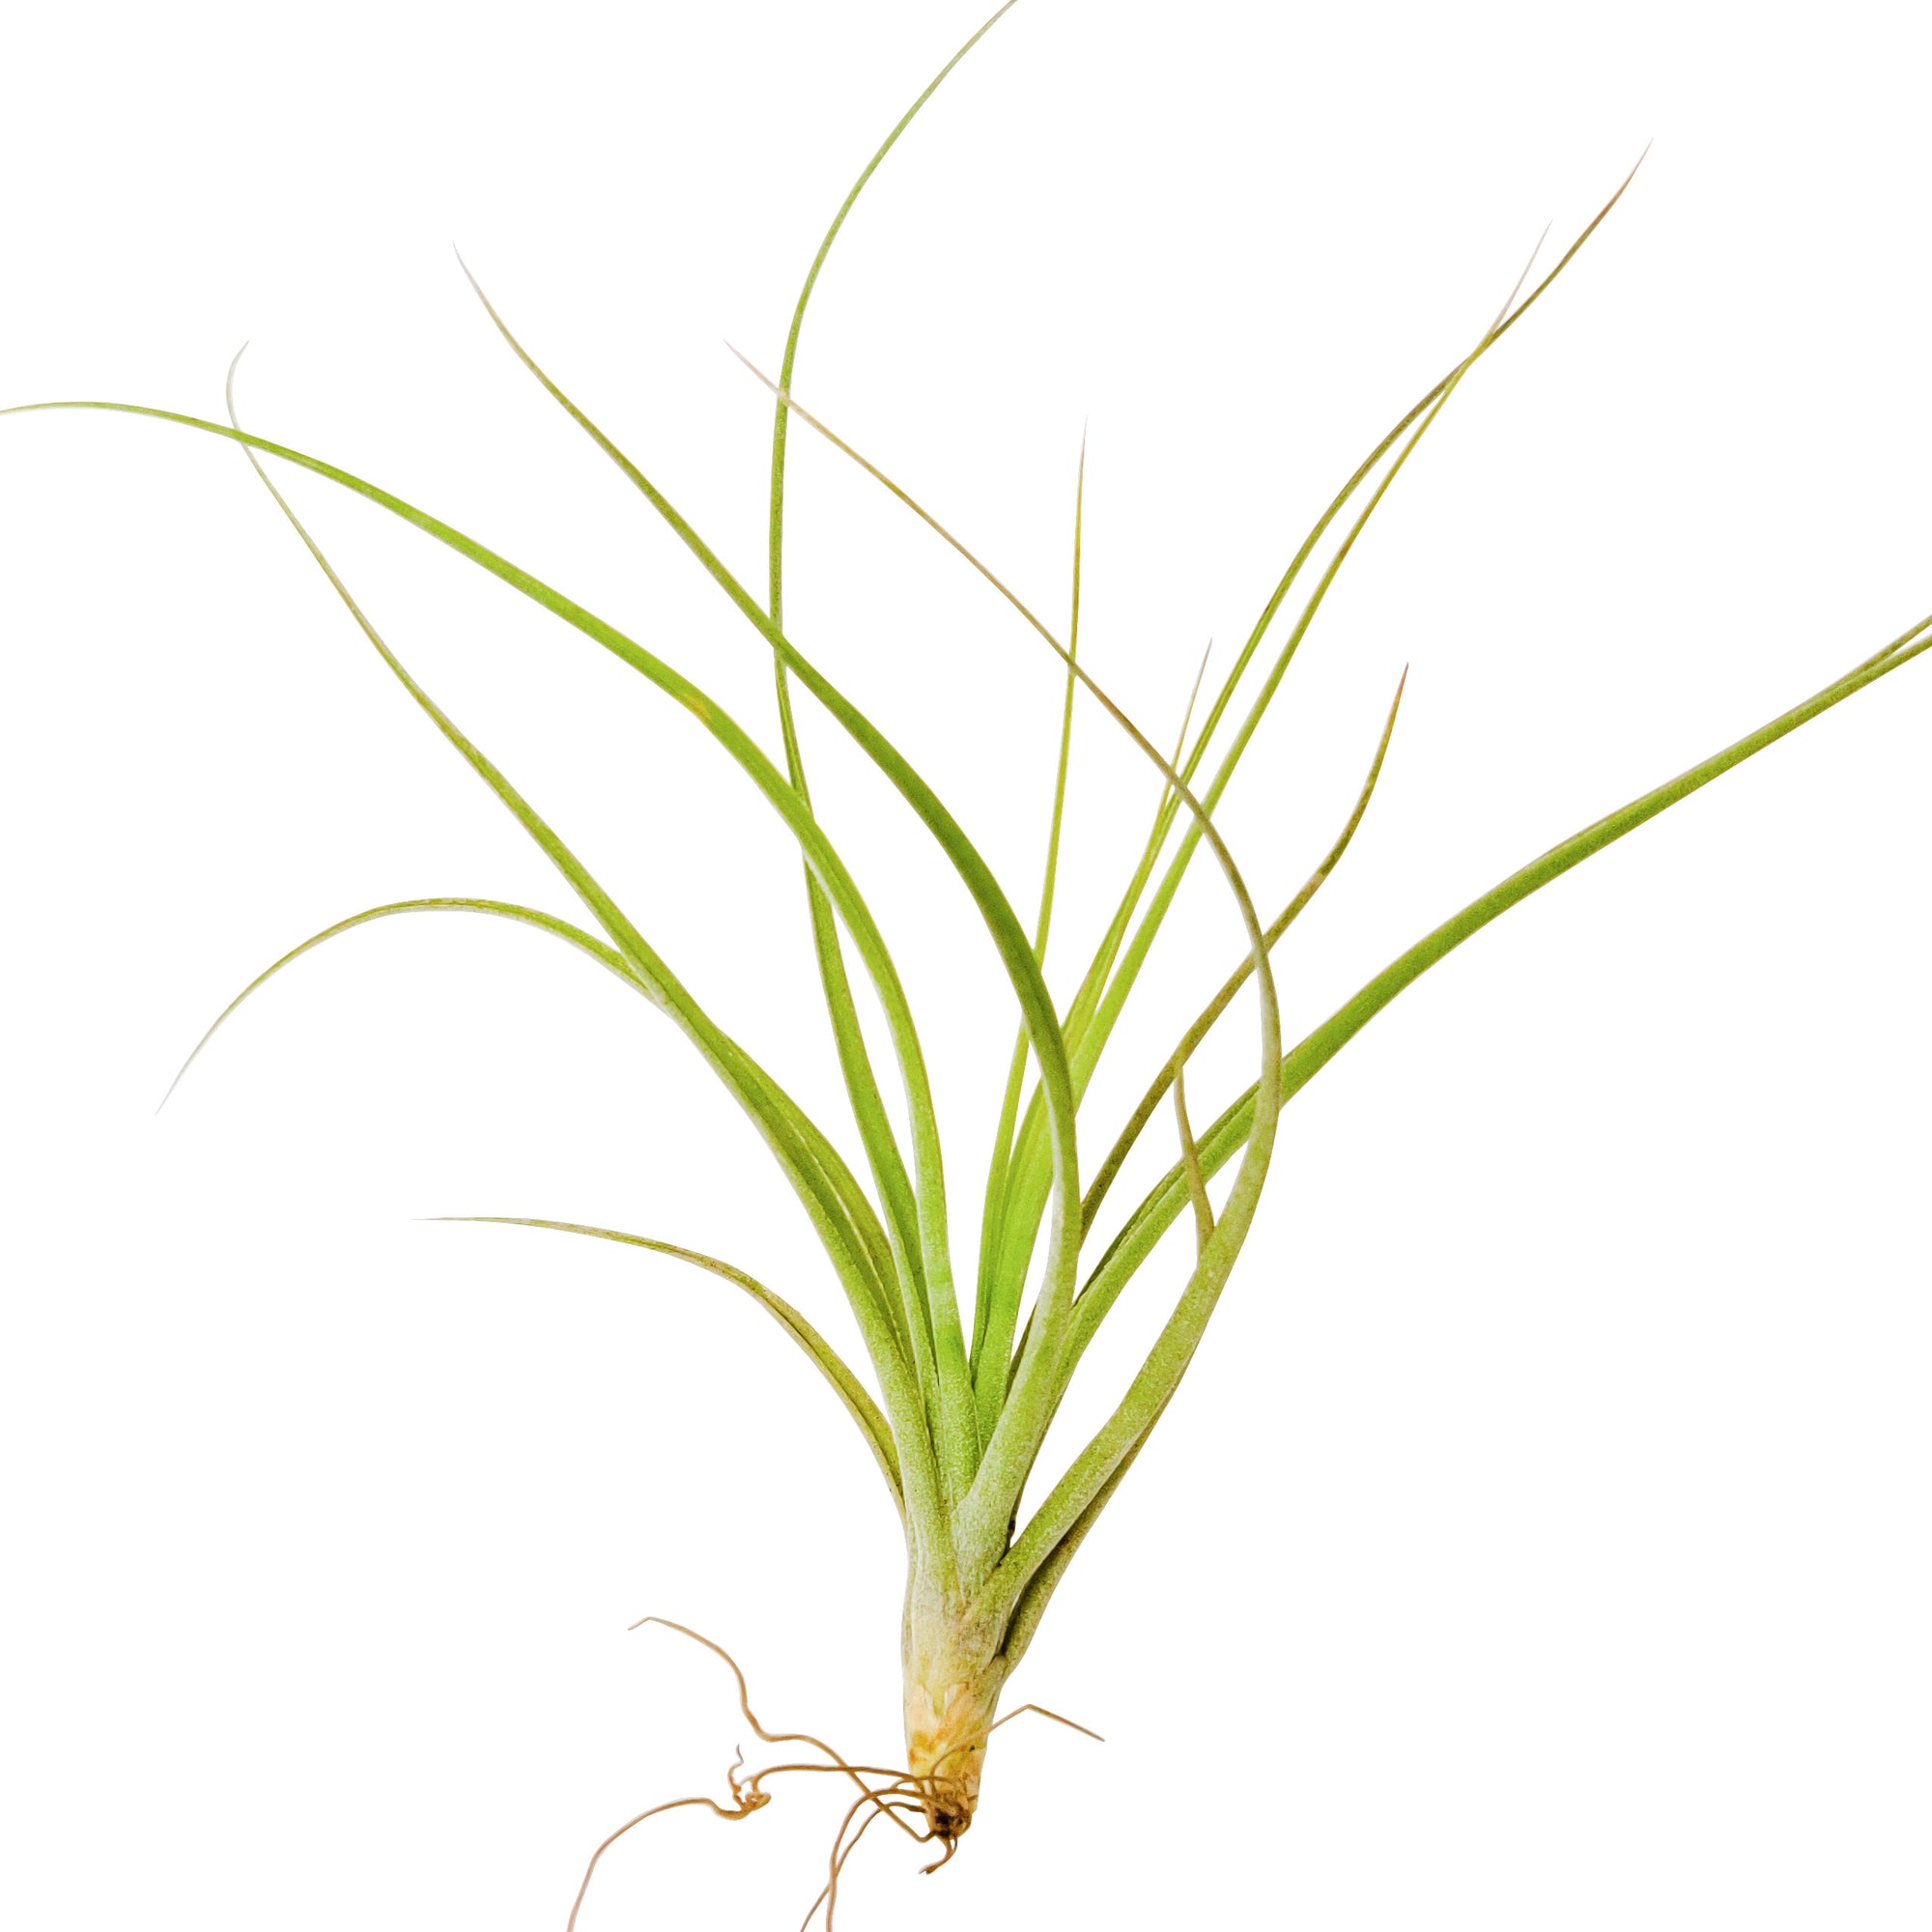 Tillandsia Moonlight Air Plant for Sale, How to grow Moonlight Air Plant indoor, Moonlight Air Plant Care, air plant gift ideas, air plant box delivered monthly, air plant home decoration